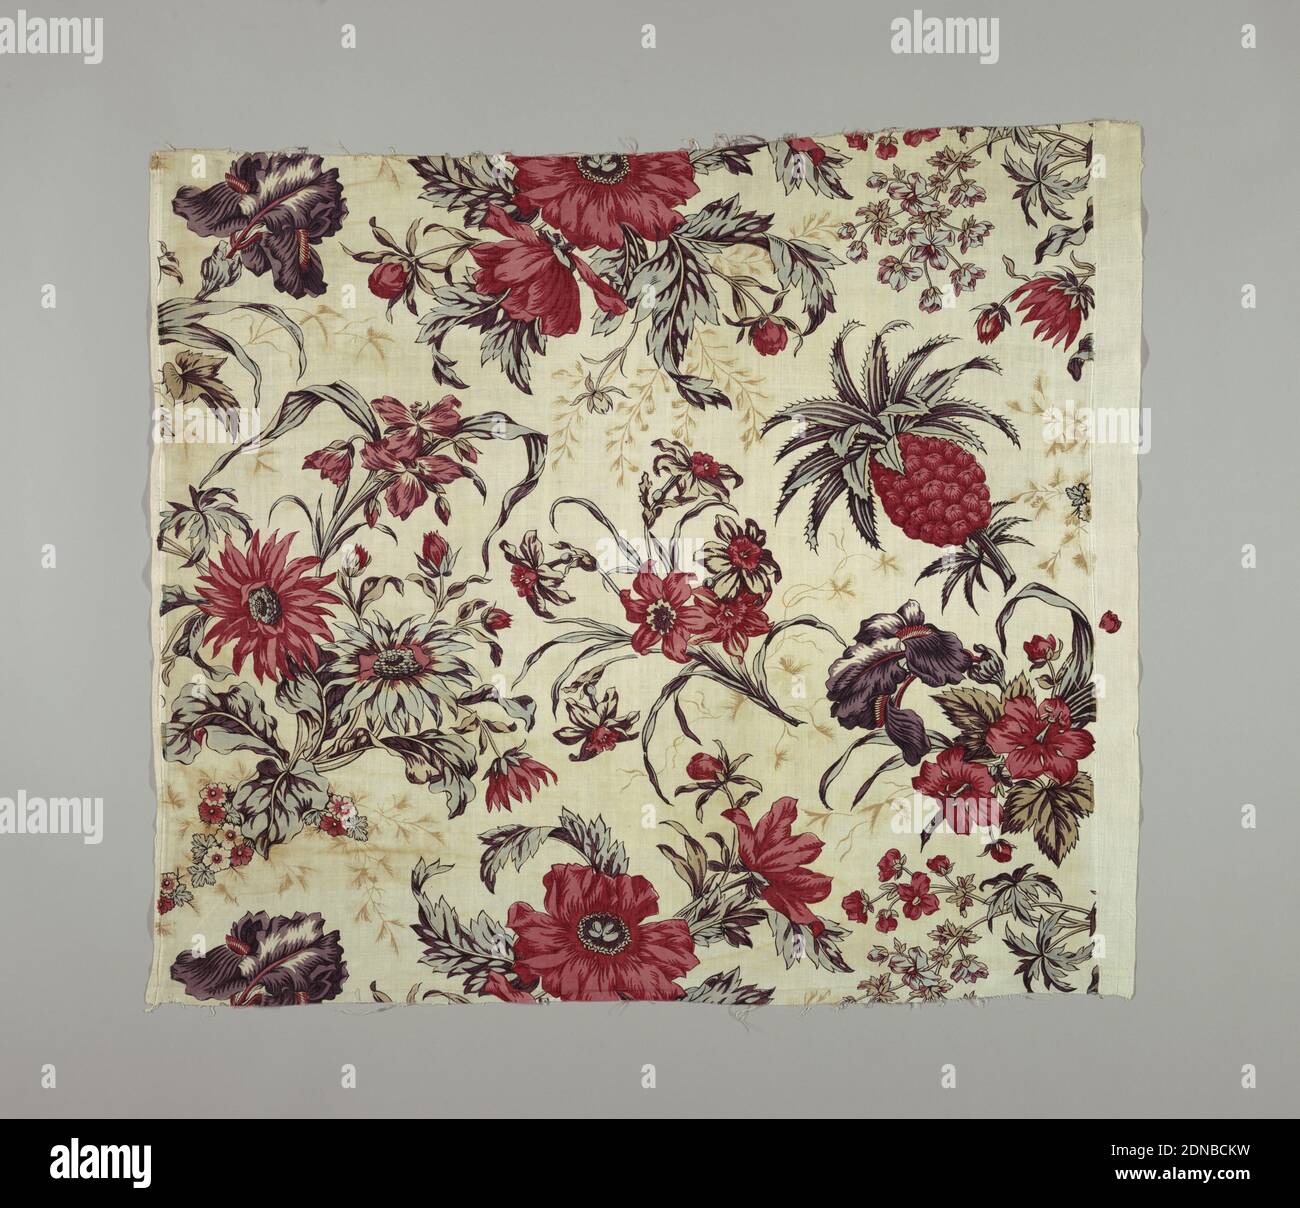 Textile, Medium: cotton Technique: relief printed, Cream white cotton, block printed in large scale naturalistic flower design in all-over clusters; iris, lily, amaryllis, daffodil and pineapple. Shades of red, dark purple, brown, blue; remains of yellow, now faded, show in sections of leaves, indicating combining of yellow over blue for green. A background printing of fine small scale foliage, in shadow effect, light brown., France, 18th century, printed, dyed & painted textiles, Textile Stock Photo